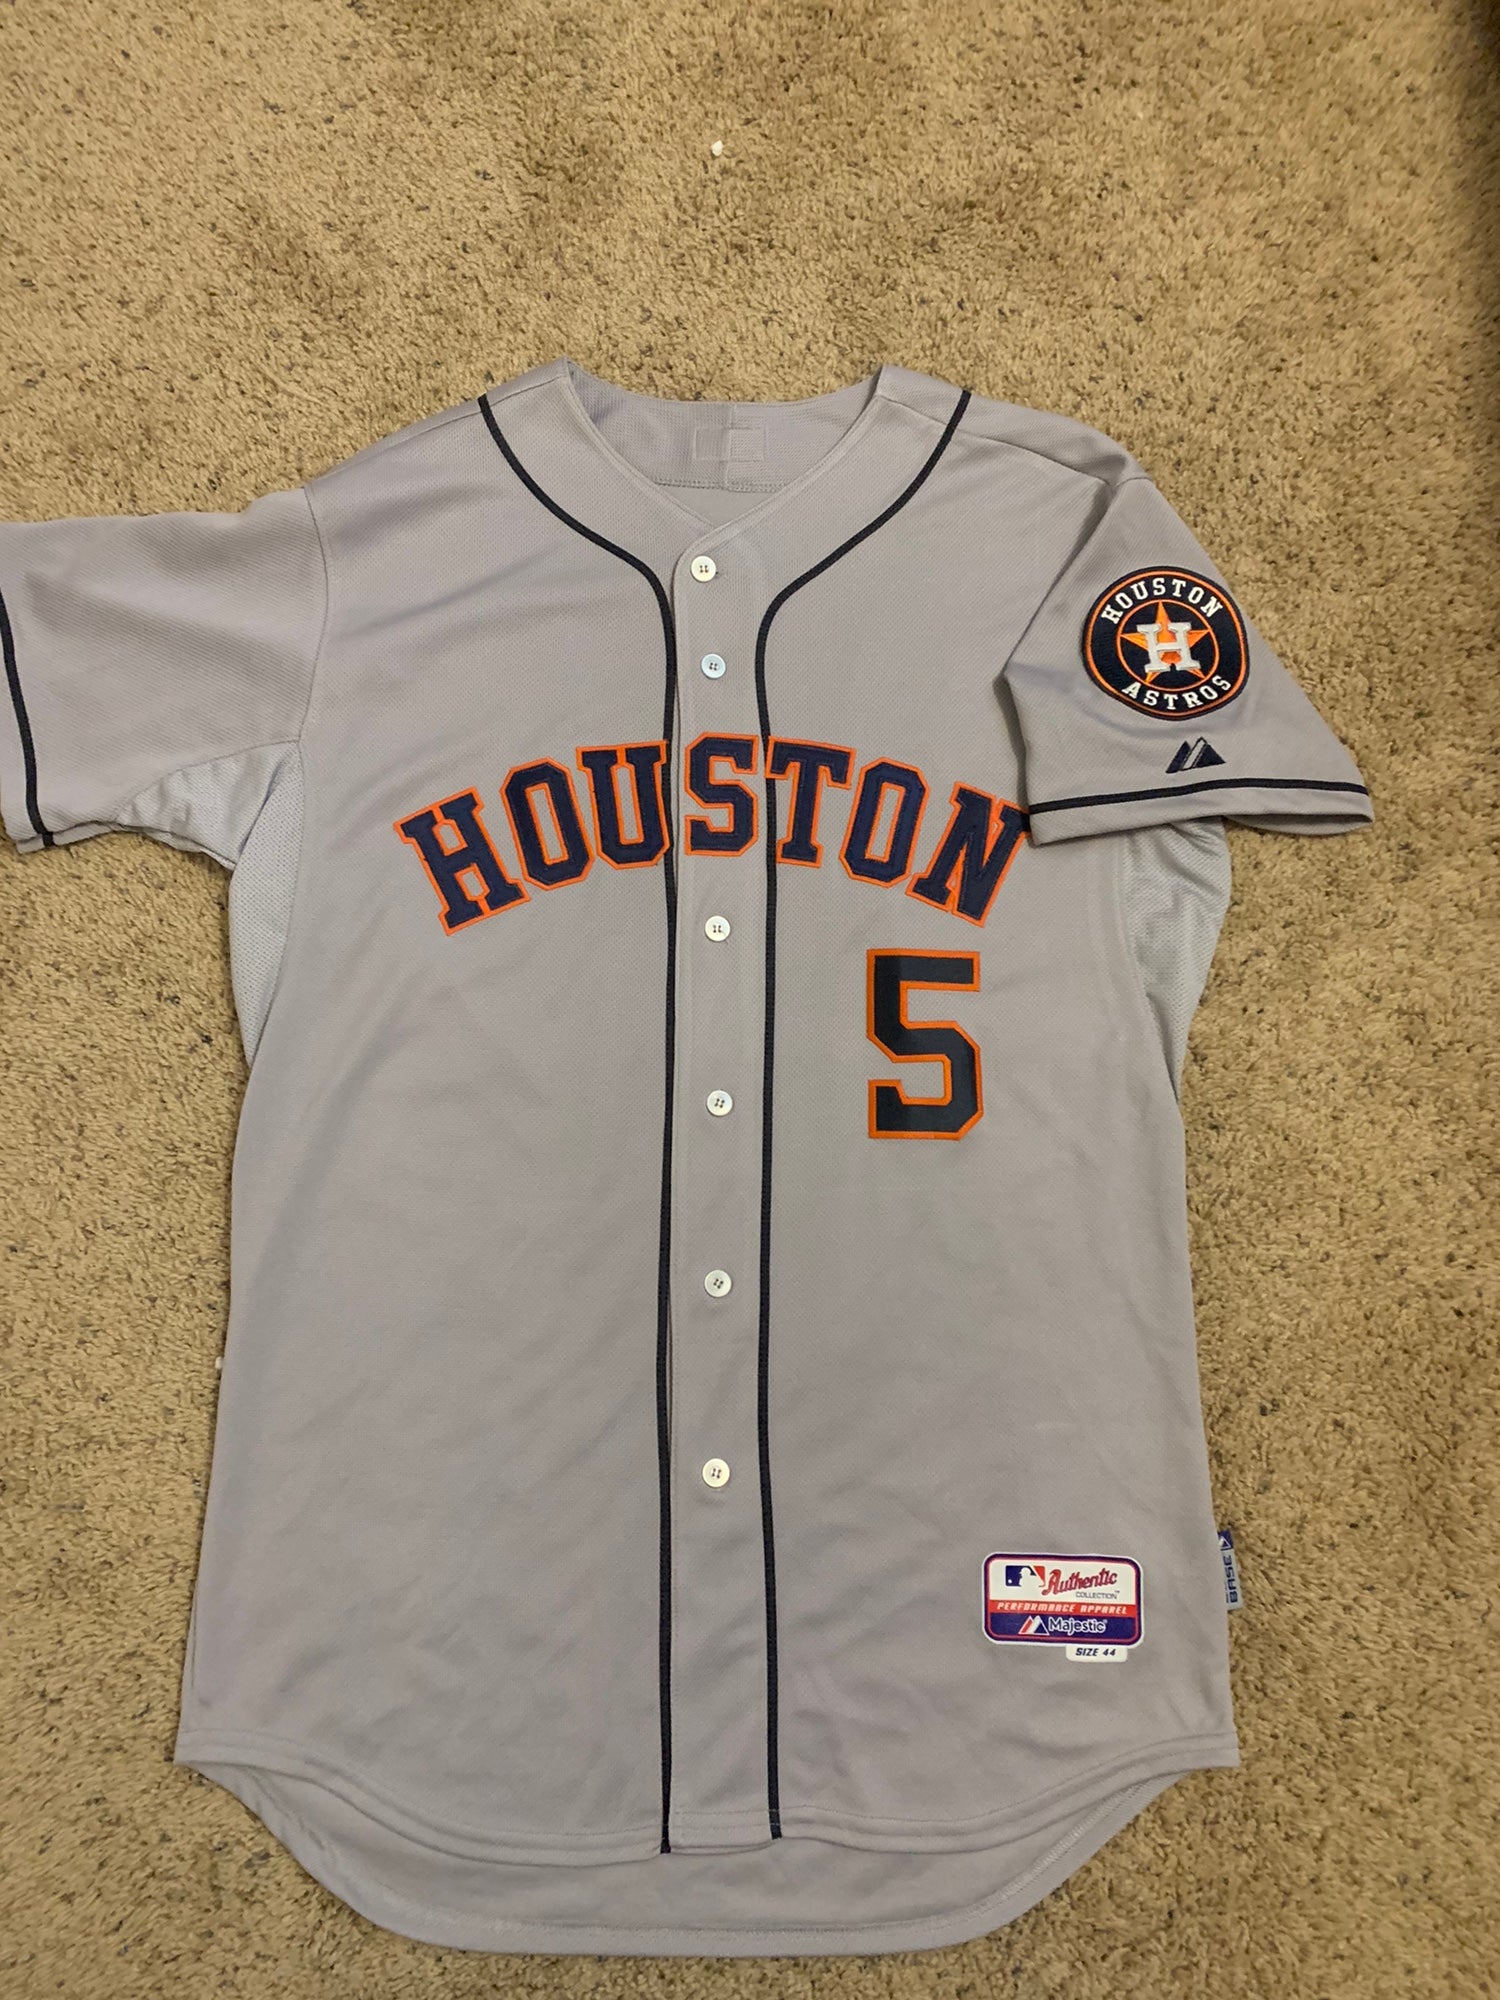 Majestic, Shirts, Mlb Majestic Classic Vintage Houston Astros Jeff  Bagwell 5 Throwback Jersey